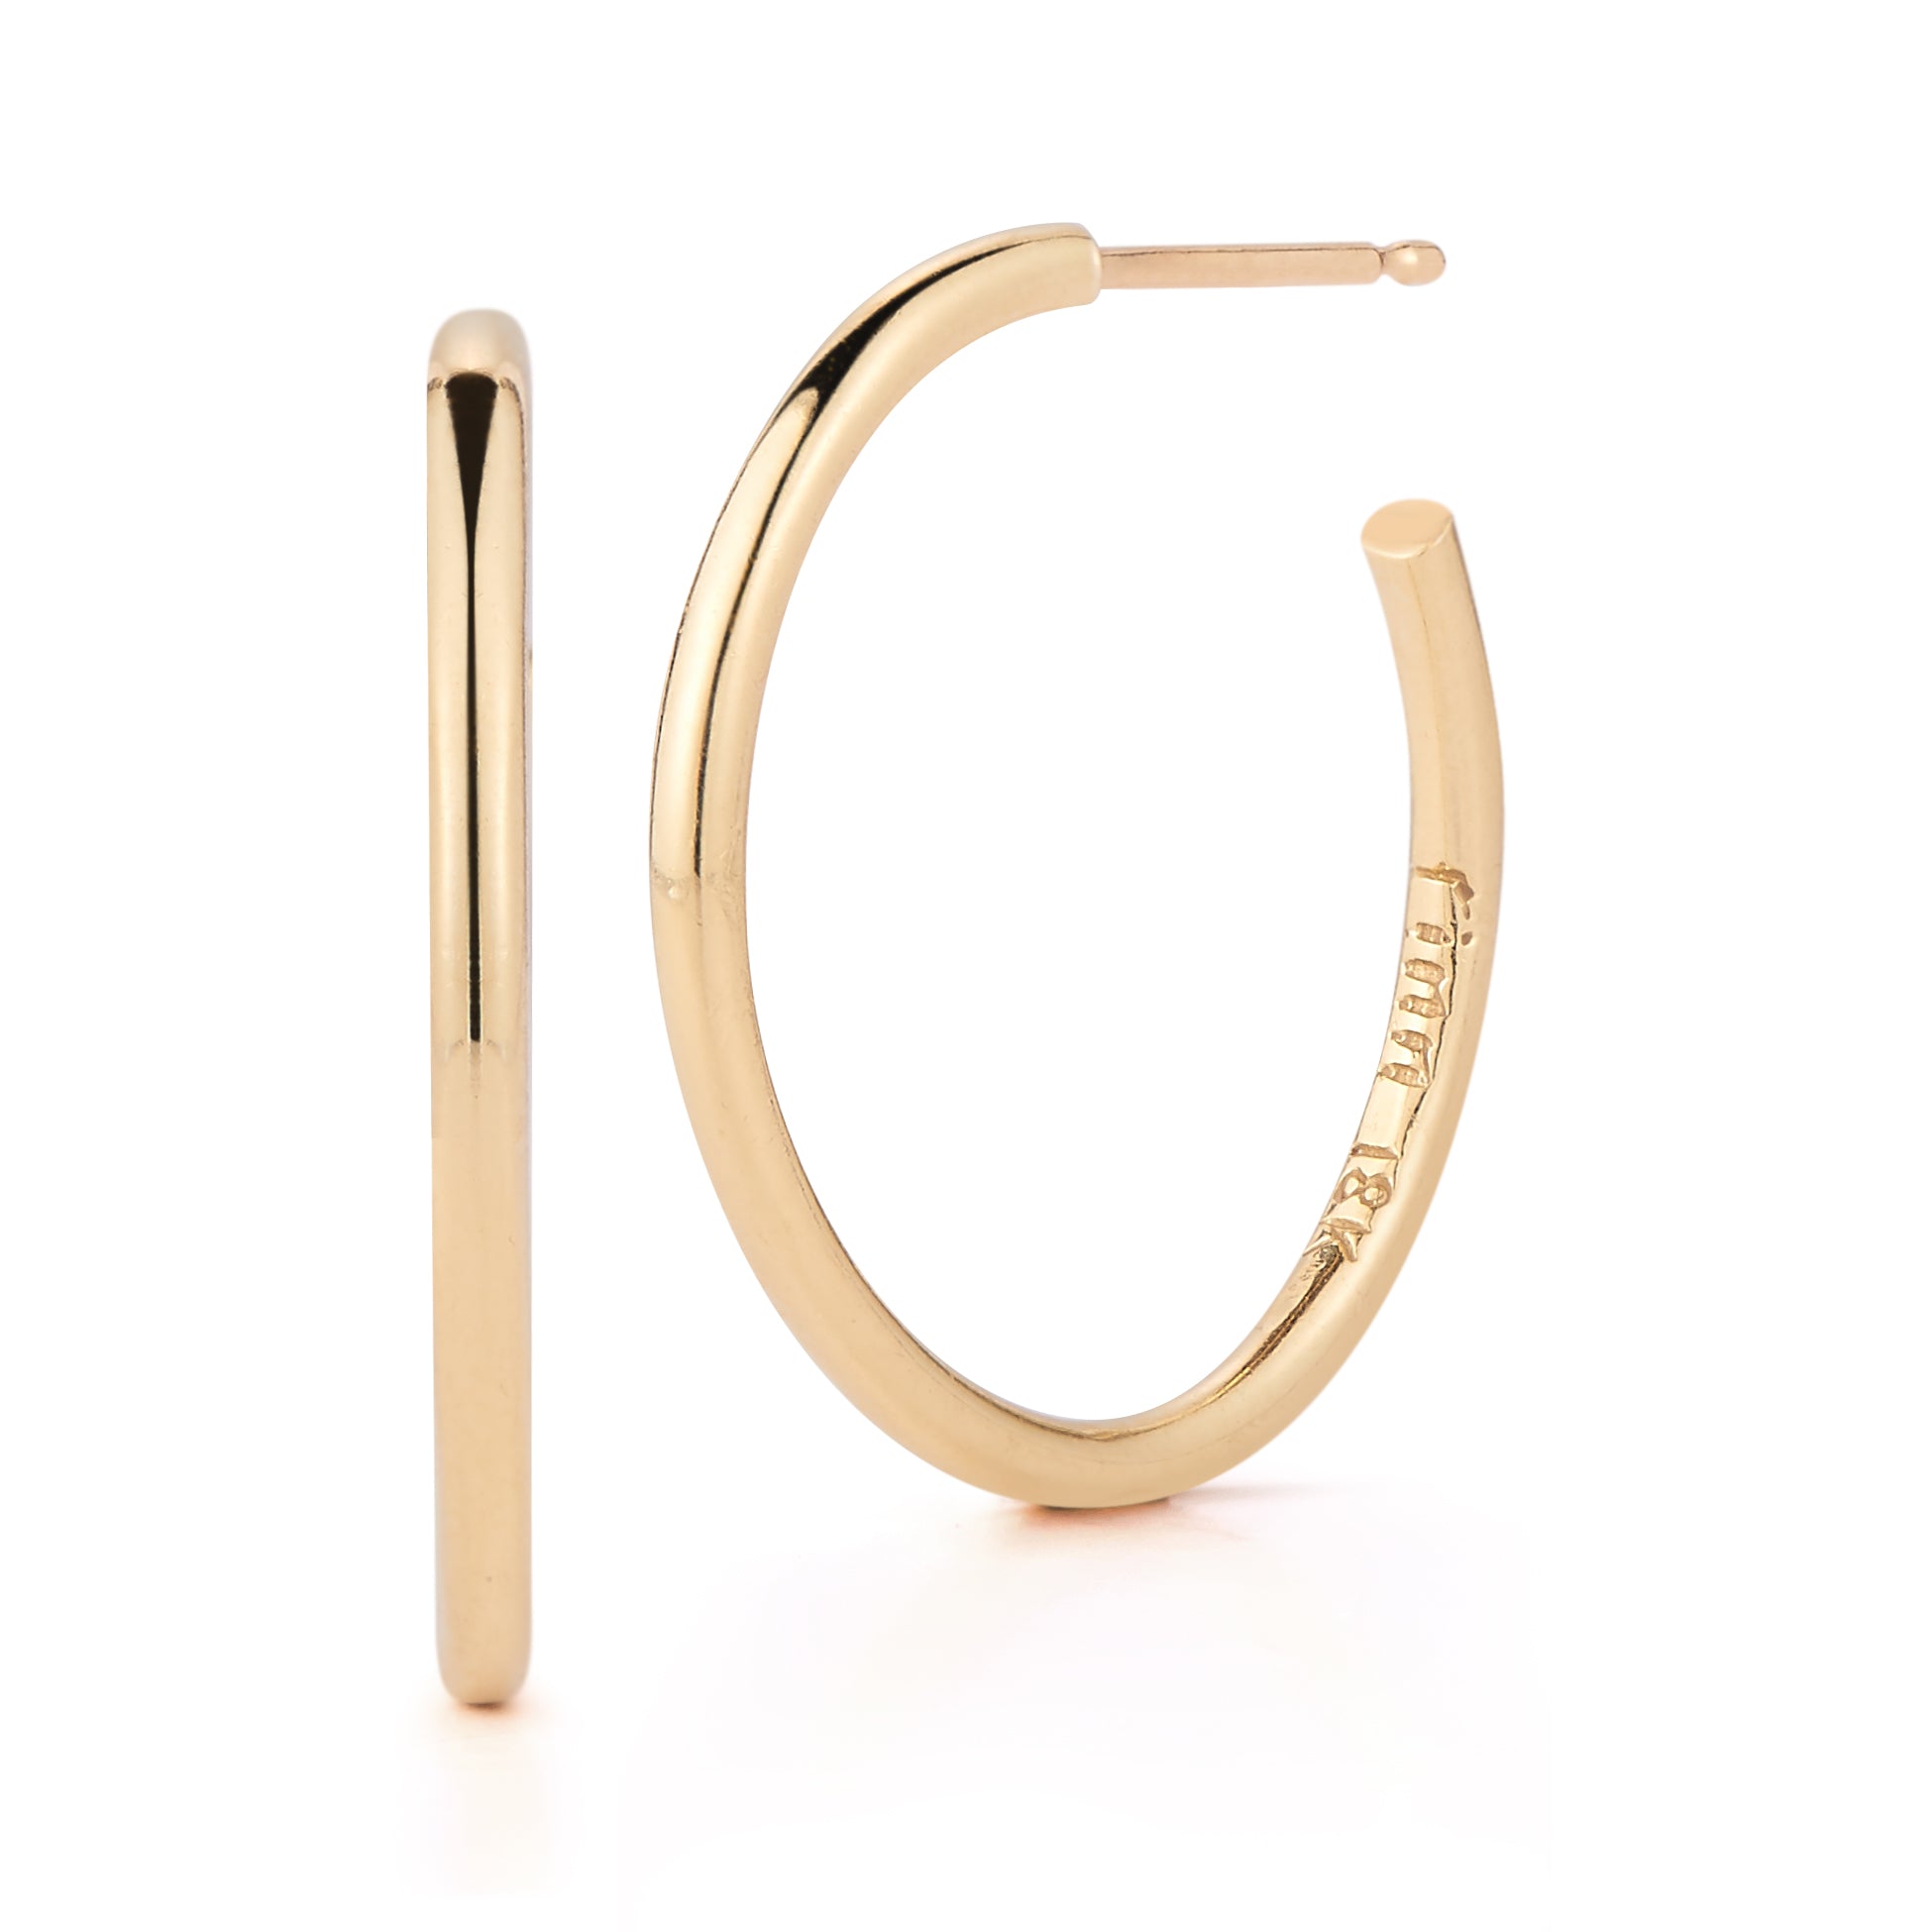 solid and lightweight day to night 18k gold hoop earrings by finn by candice pool neistat 